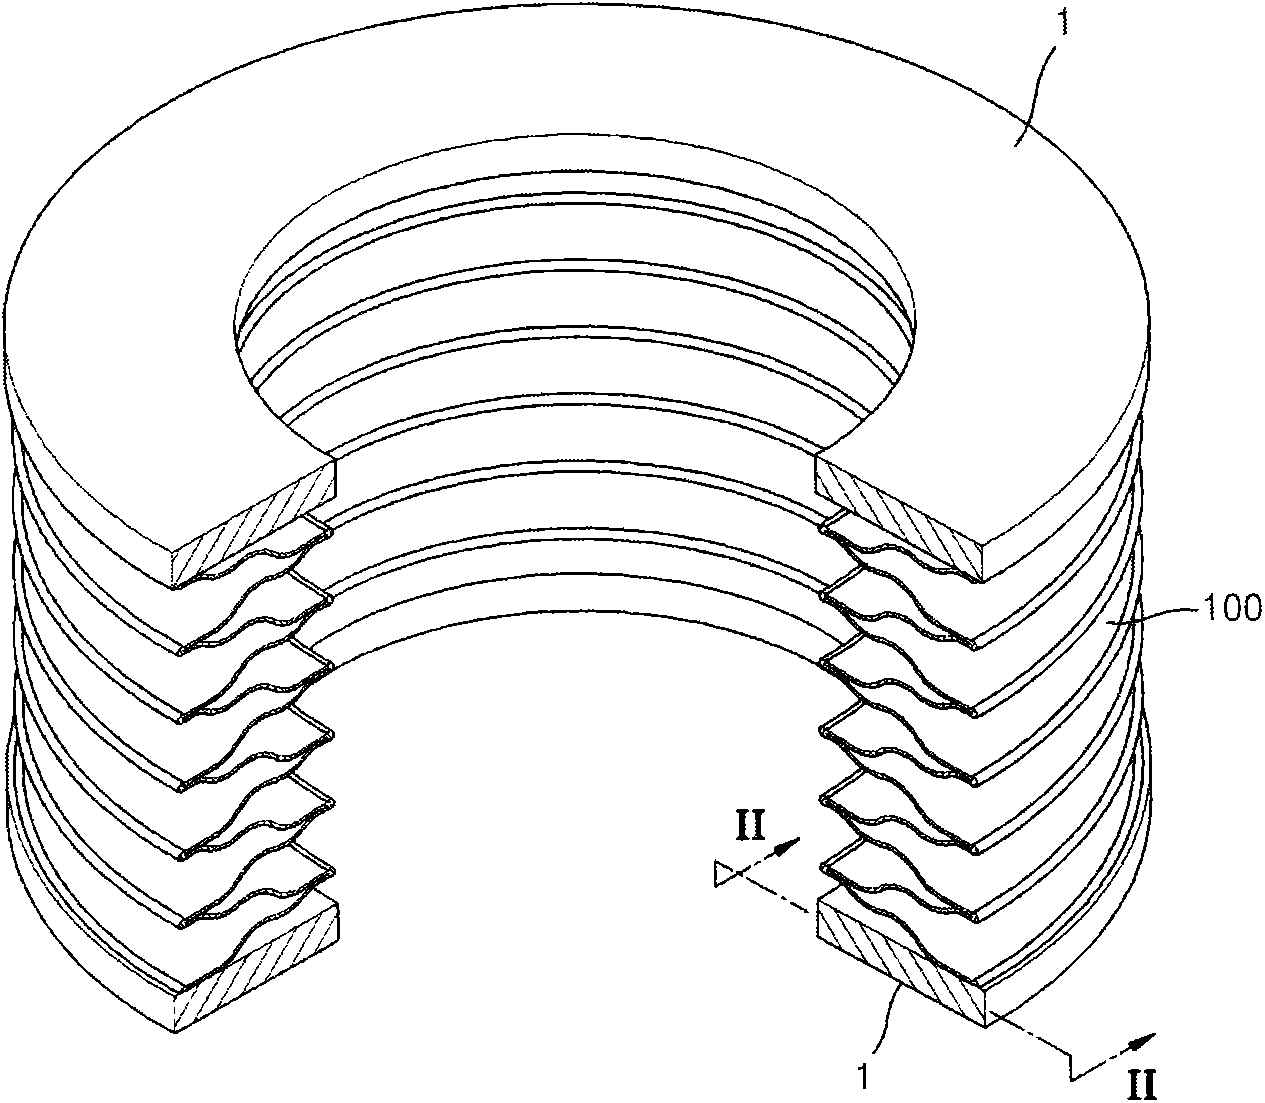 Cooling ring for welding bellows generating less metal powder